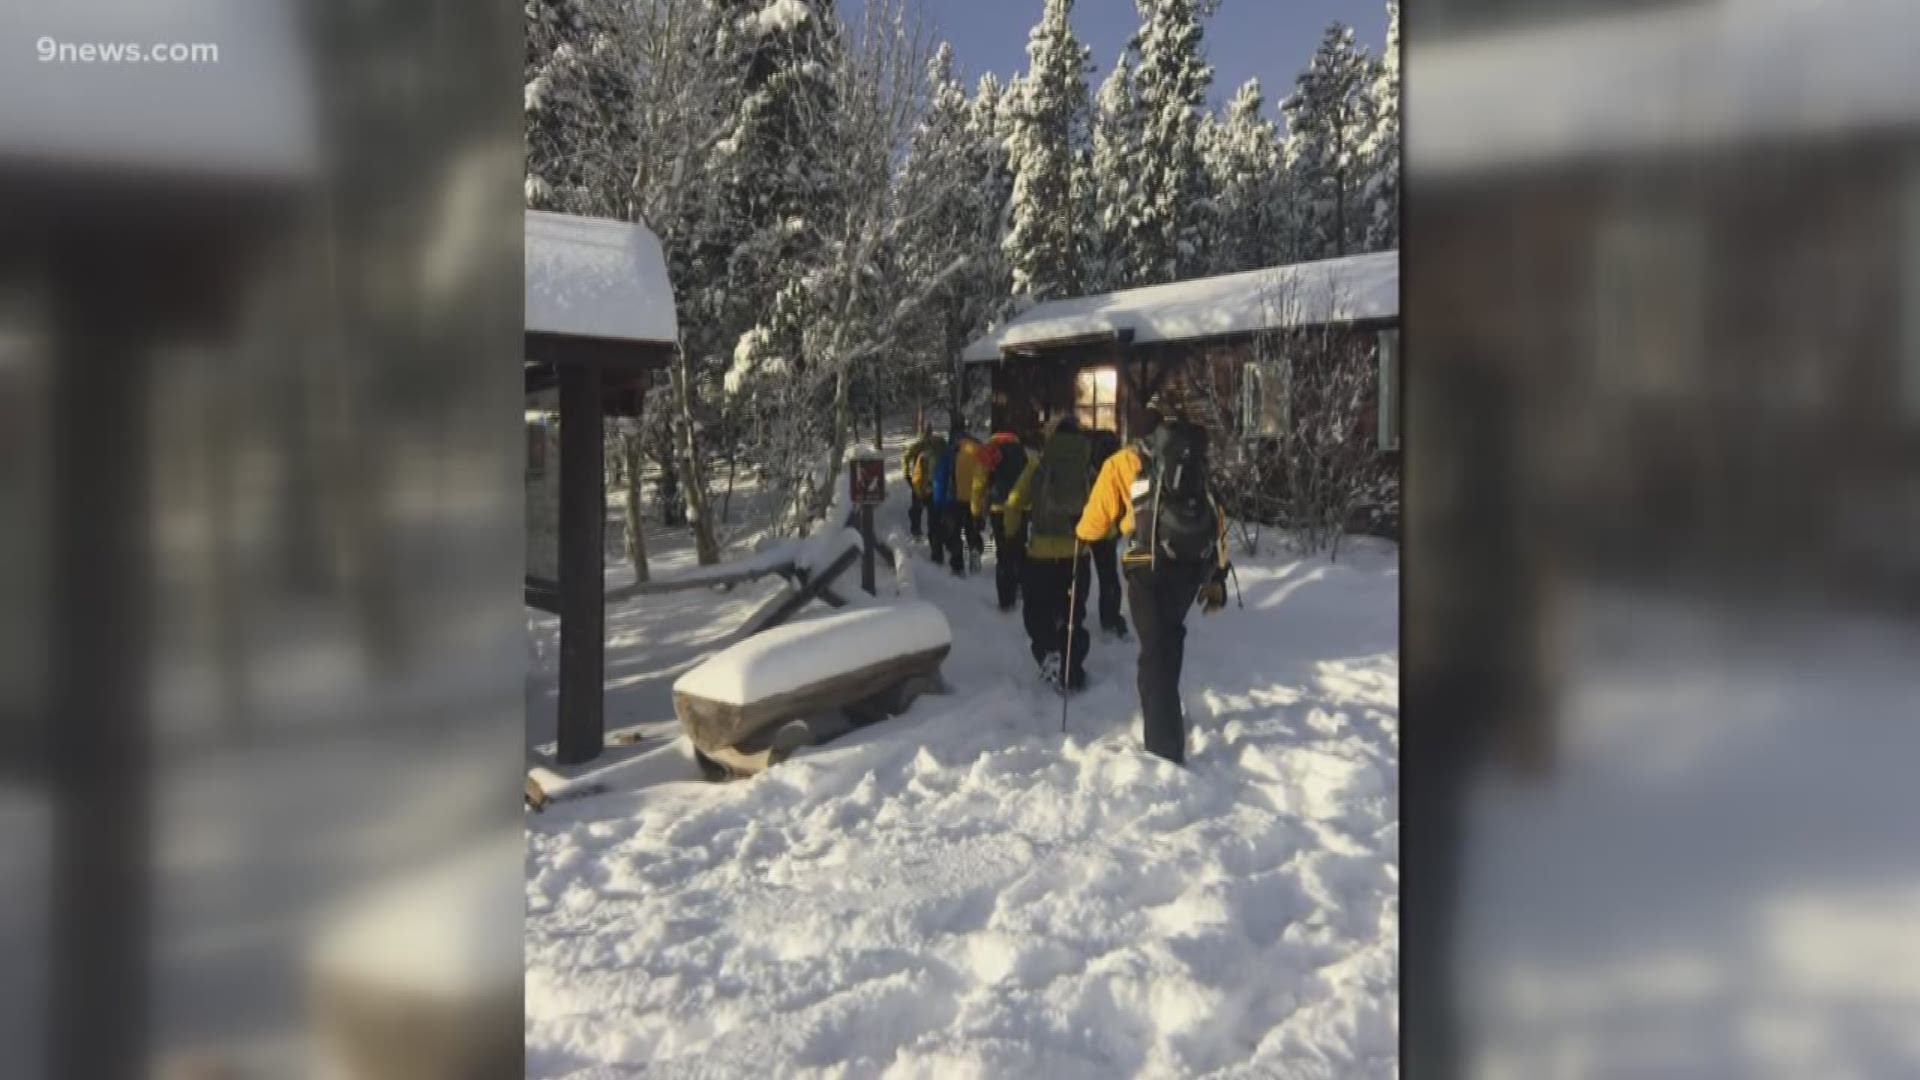 A body found covered in deep snow at an elevation of more than 12,000 feet in the Long's Peak area of Rocky Mountain National Park is likely that of a New Jersey man who has been missing since last October.